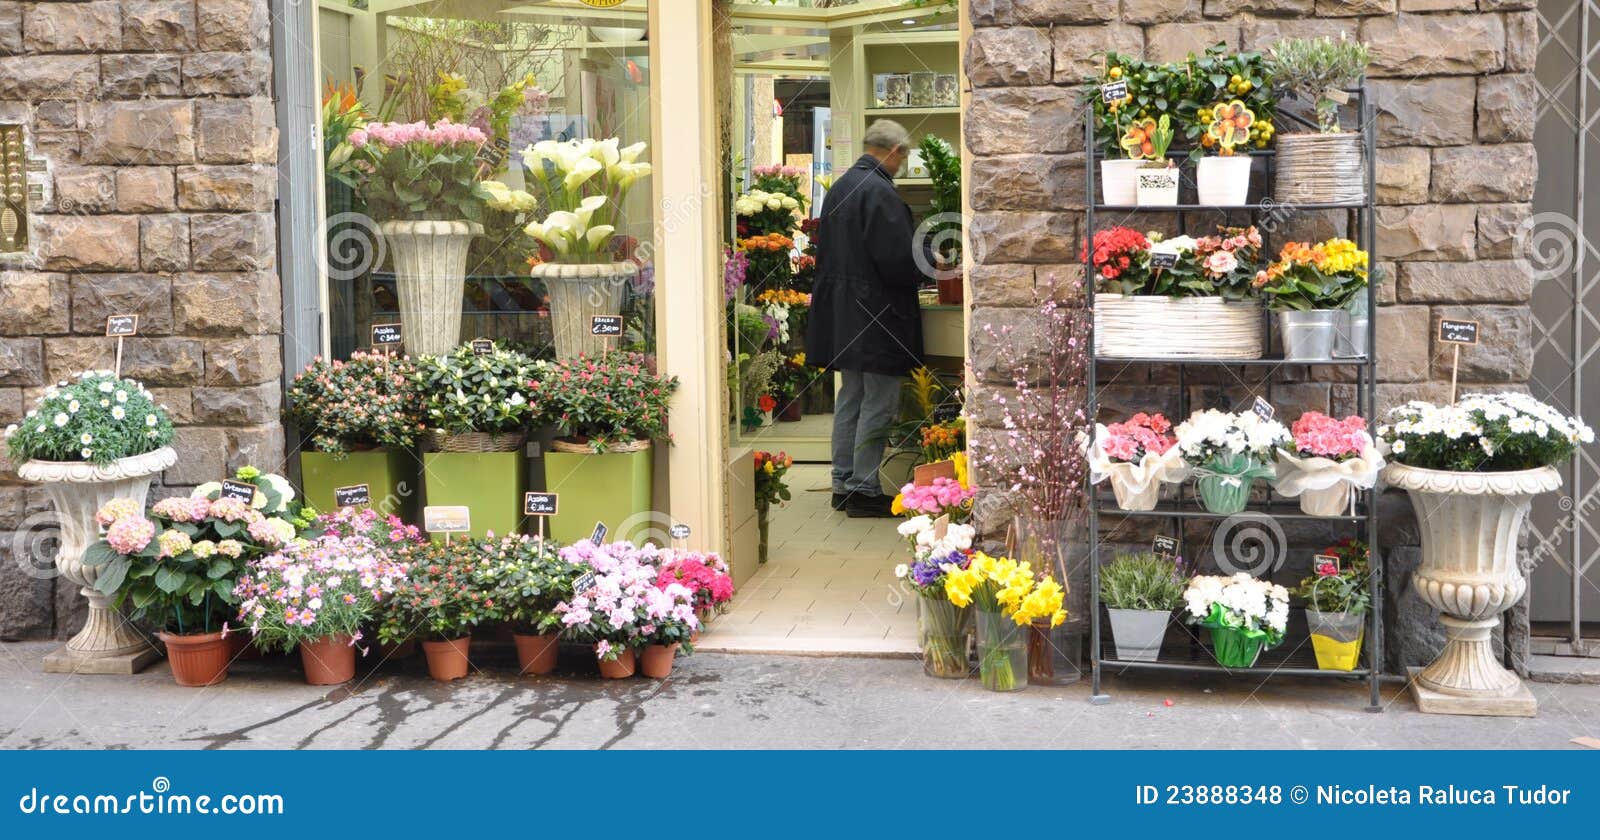 Flower Shop In Italy Editorial Stock Photo - Image: 23888348